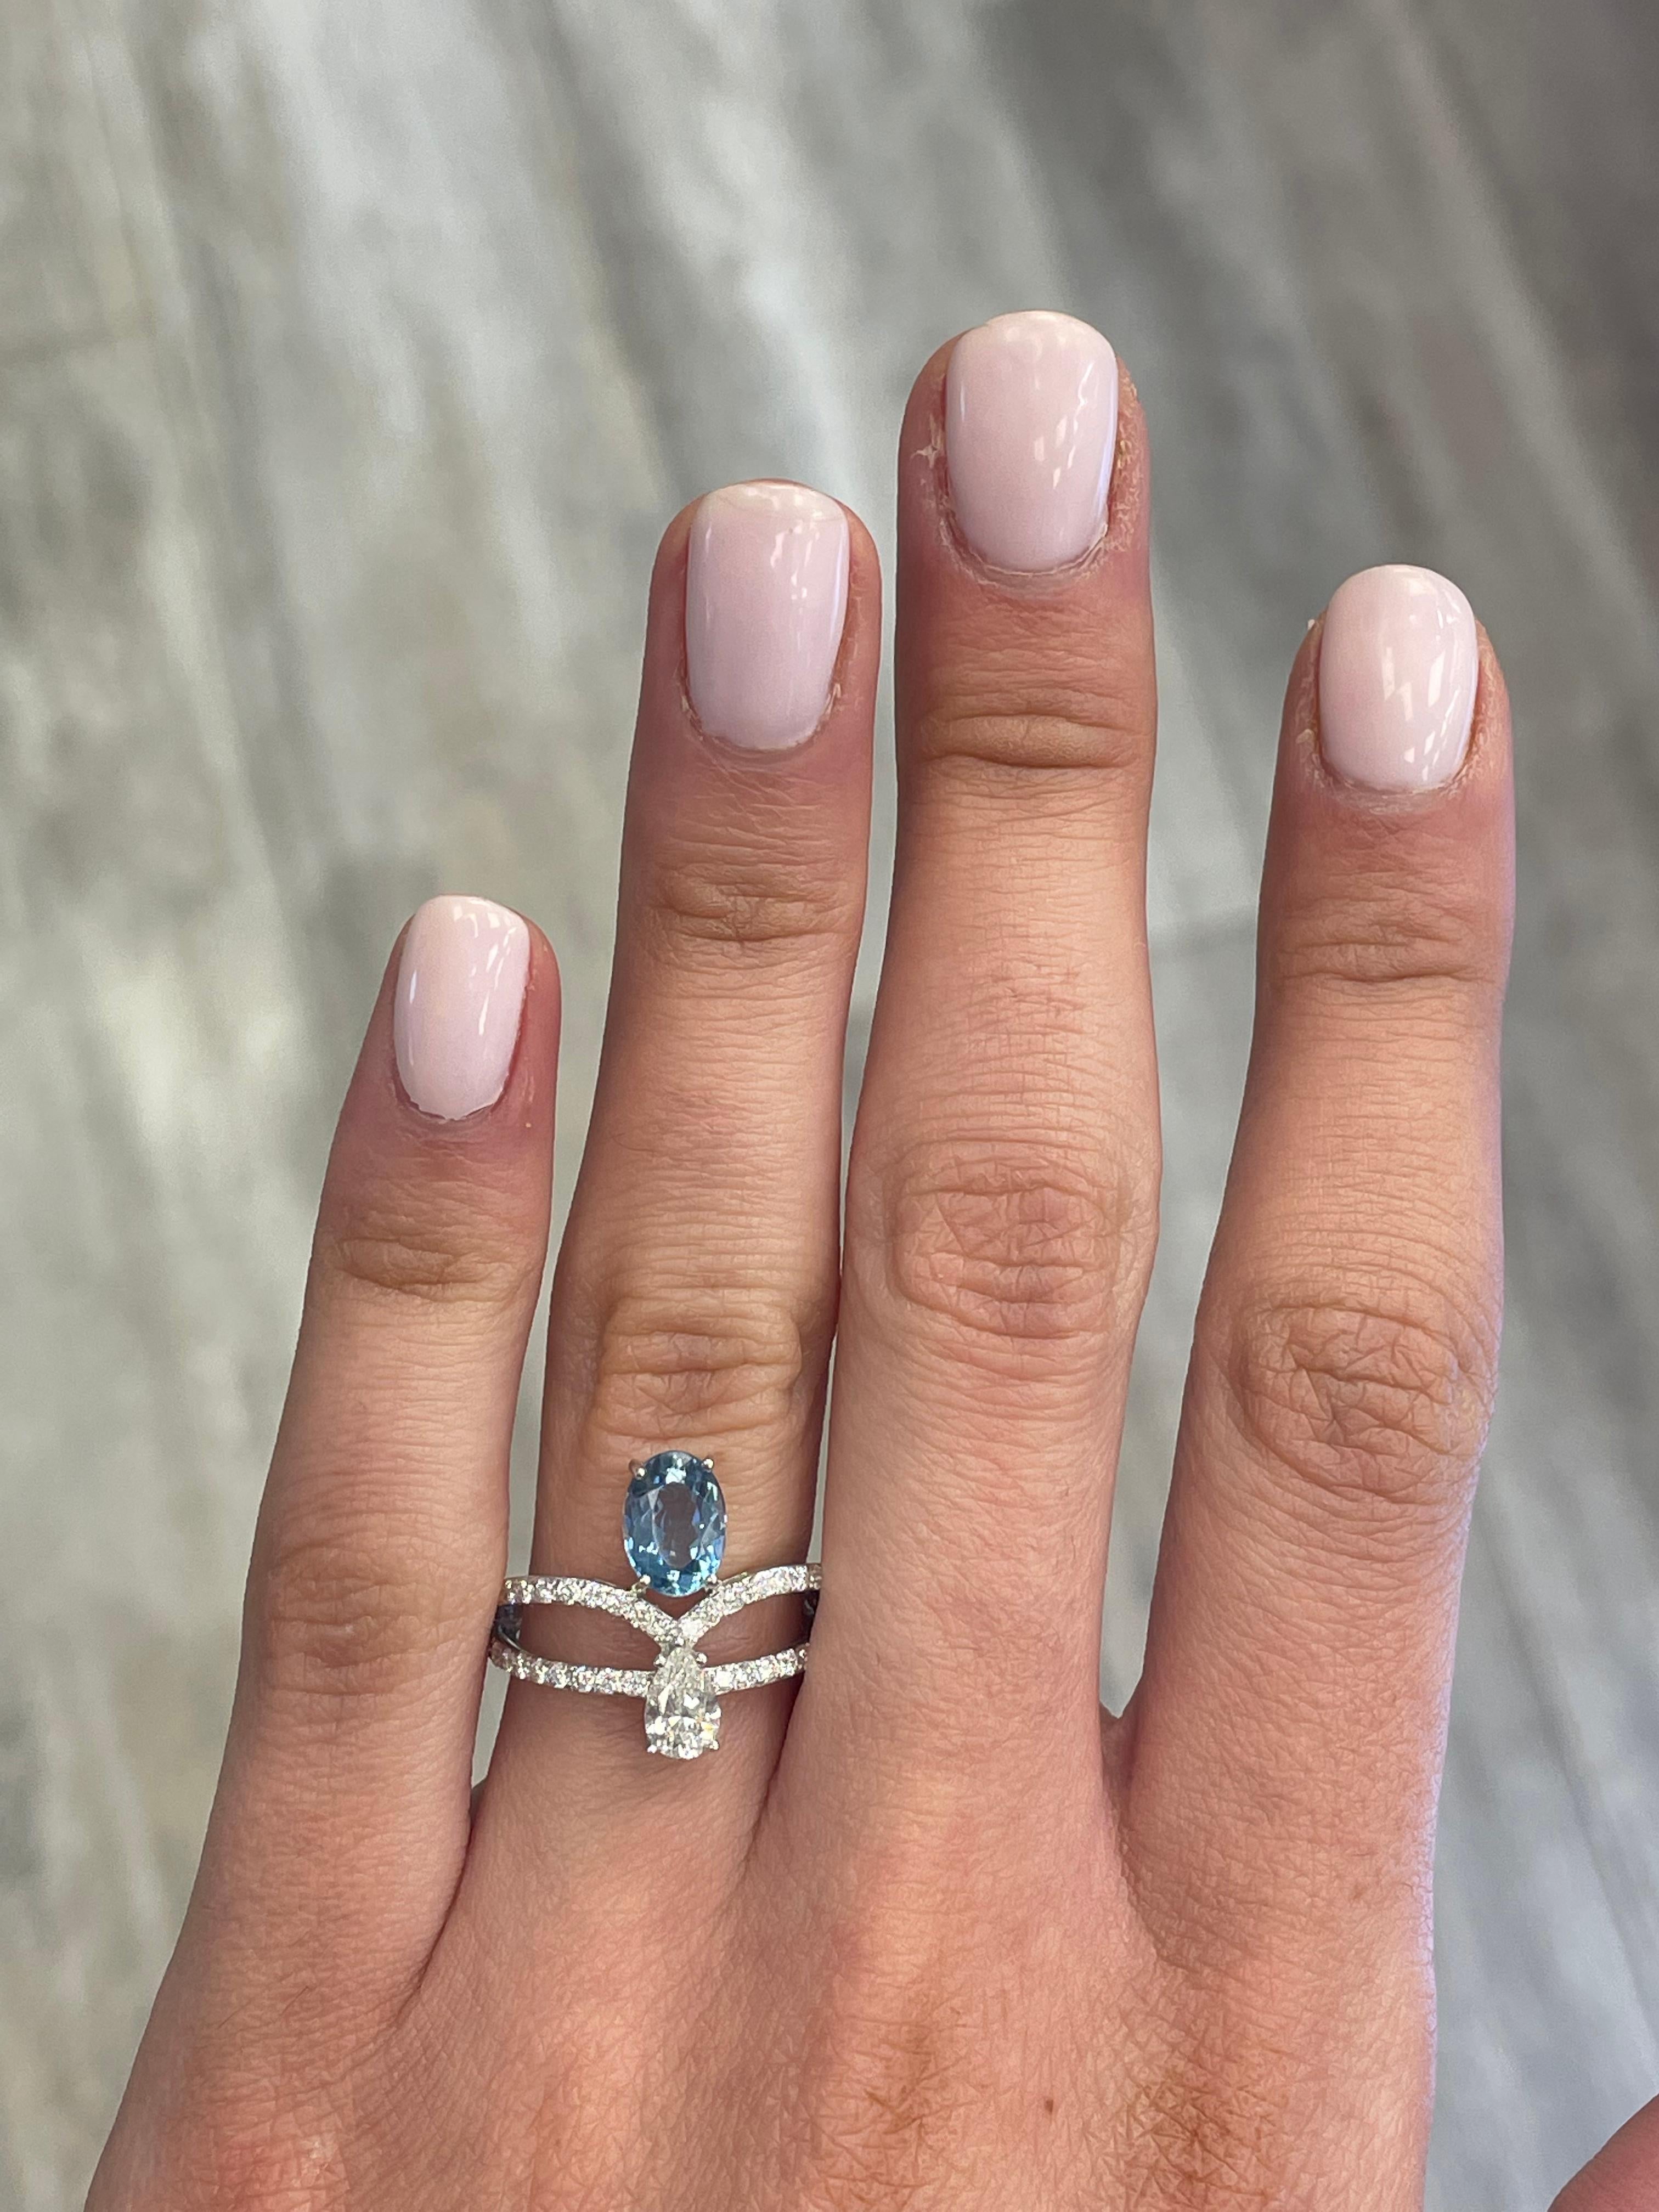 Stunning aquamarine and diamond ring, by Alexander Beverly Hills.
1 oval aquamarine, 1.02 carats. 1 pear shape diamonds, 0.38 carats, approximately F/G color and VVS clarity. Complimented by 40 round brilliant diamonds, 0.41 carats. Approximately